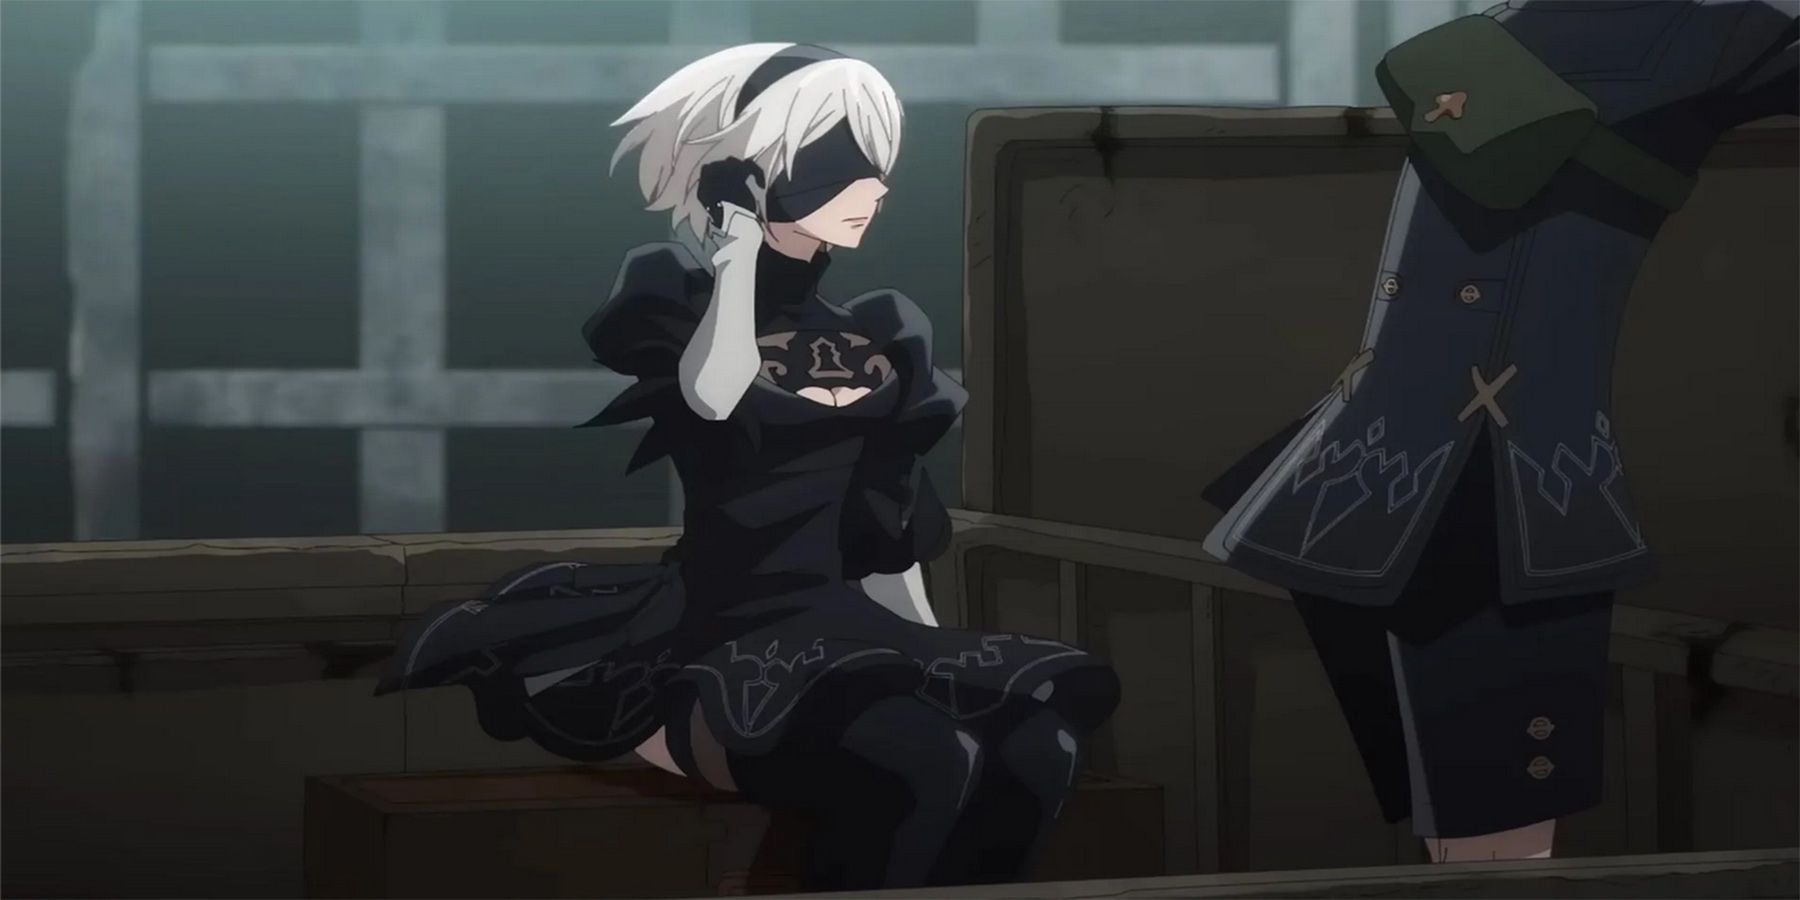 2B and 9S in a truck